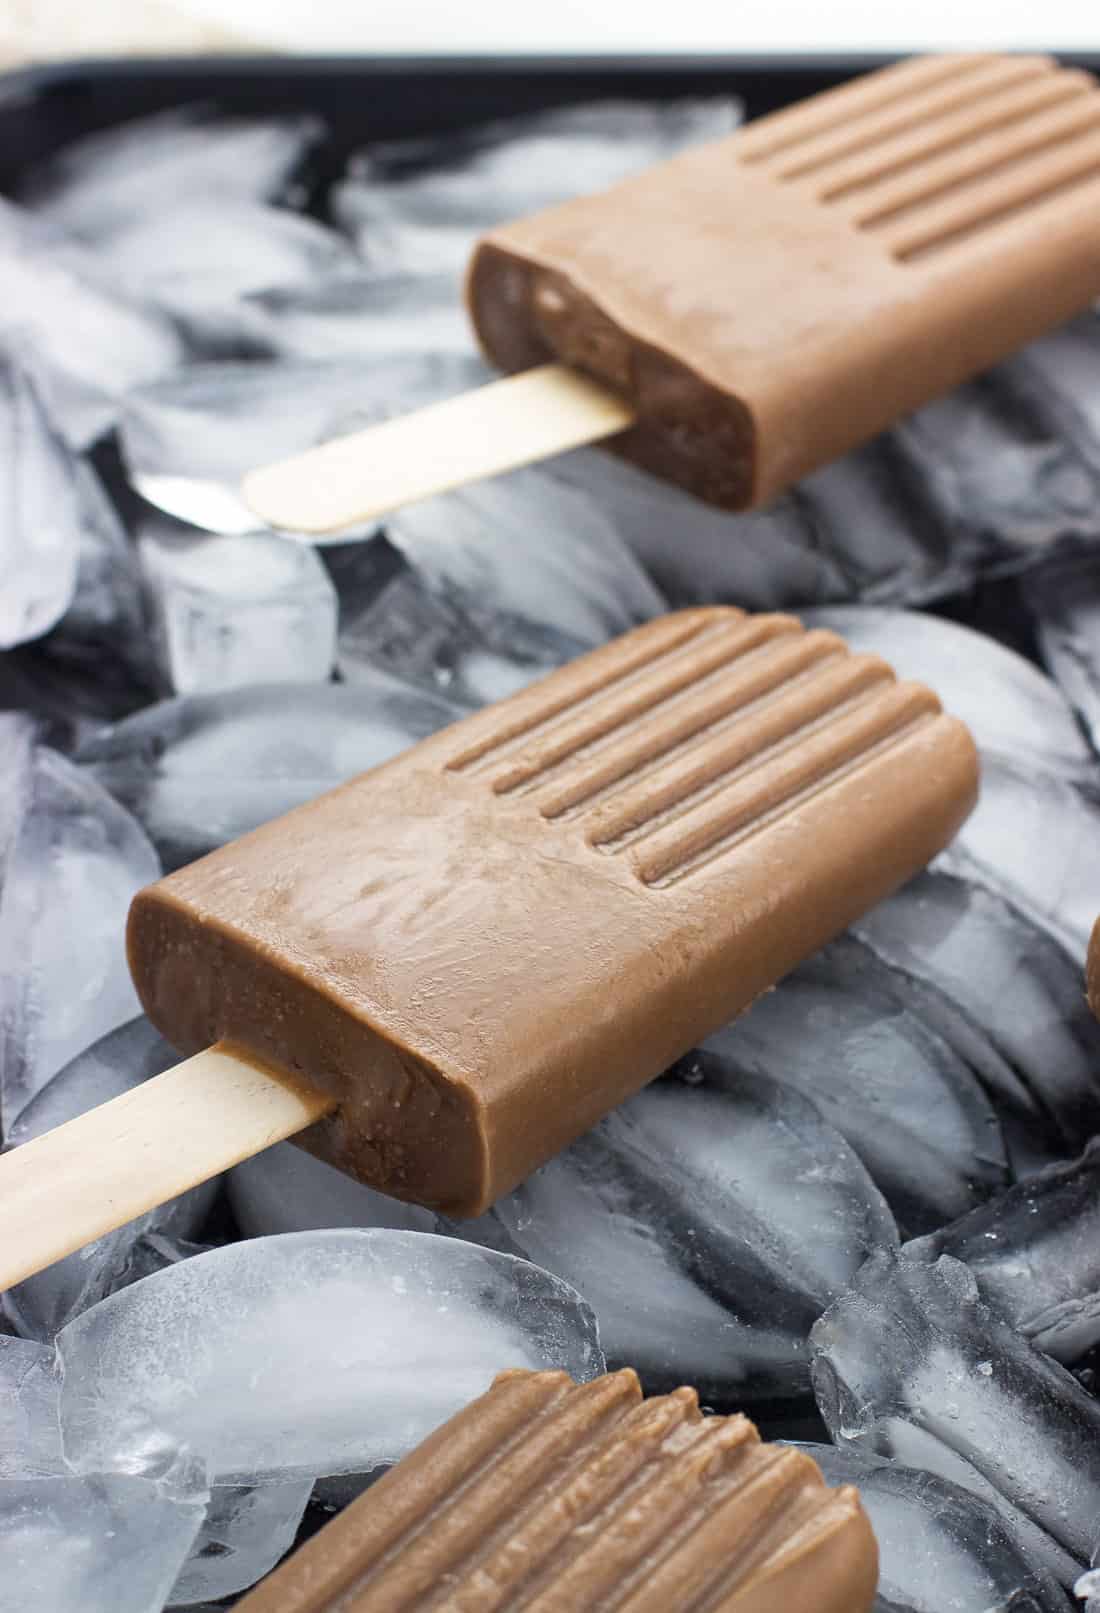 A side view of a chocolate fudge pop on a bed of ice